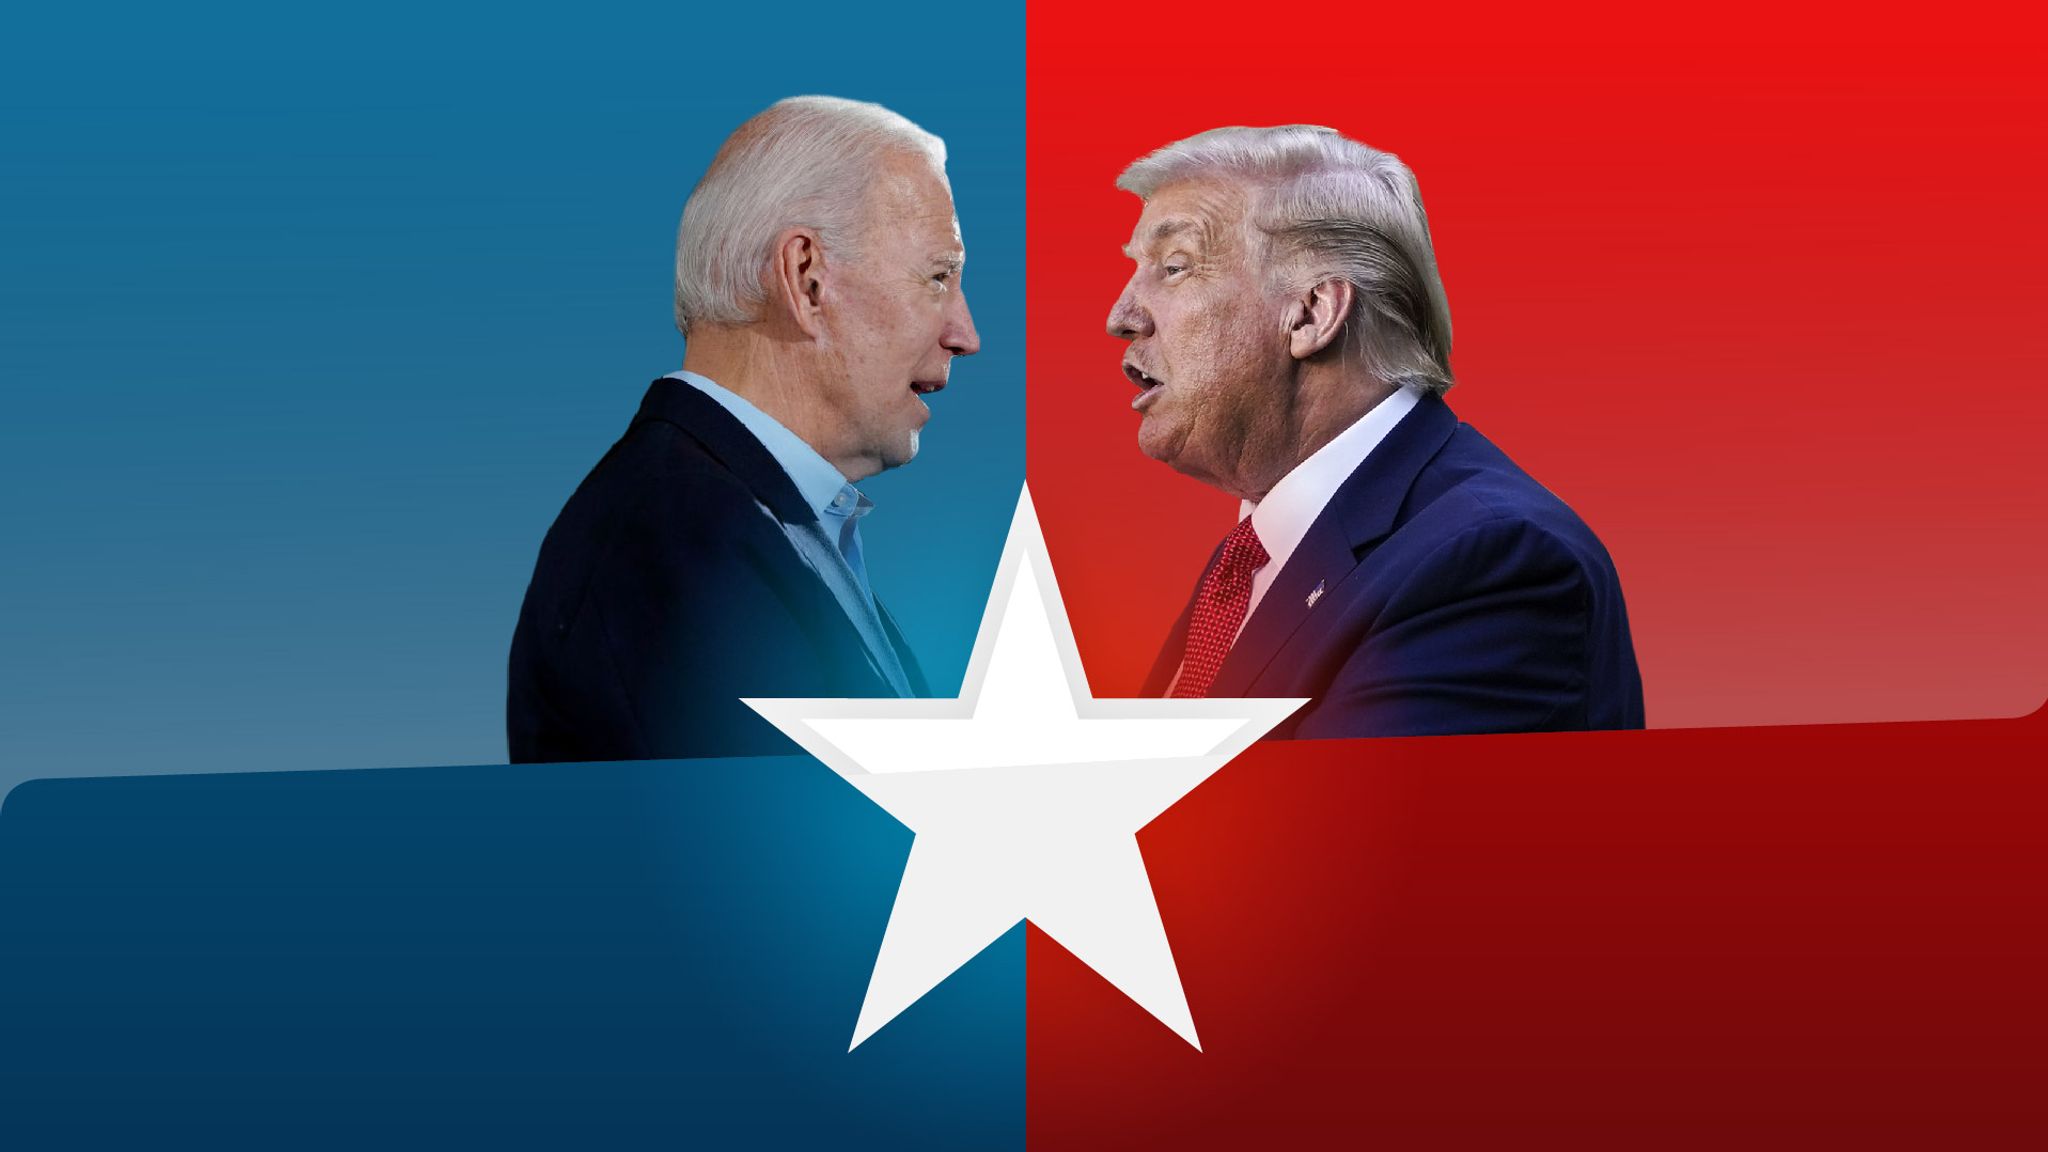 Former US presidents Joe Biden and Donald Trump standing together and greeting each other.